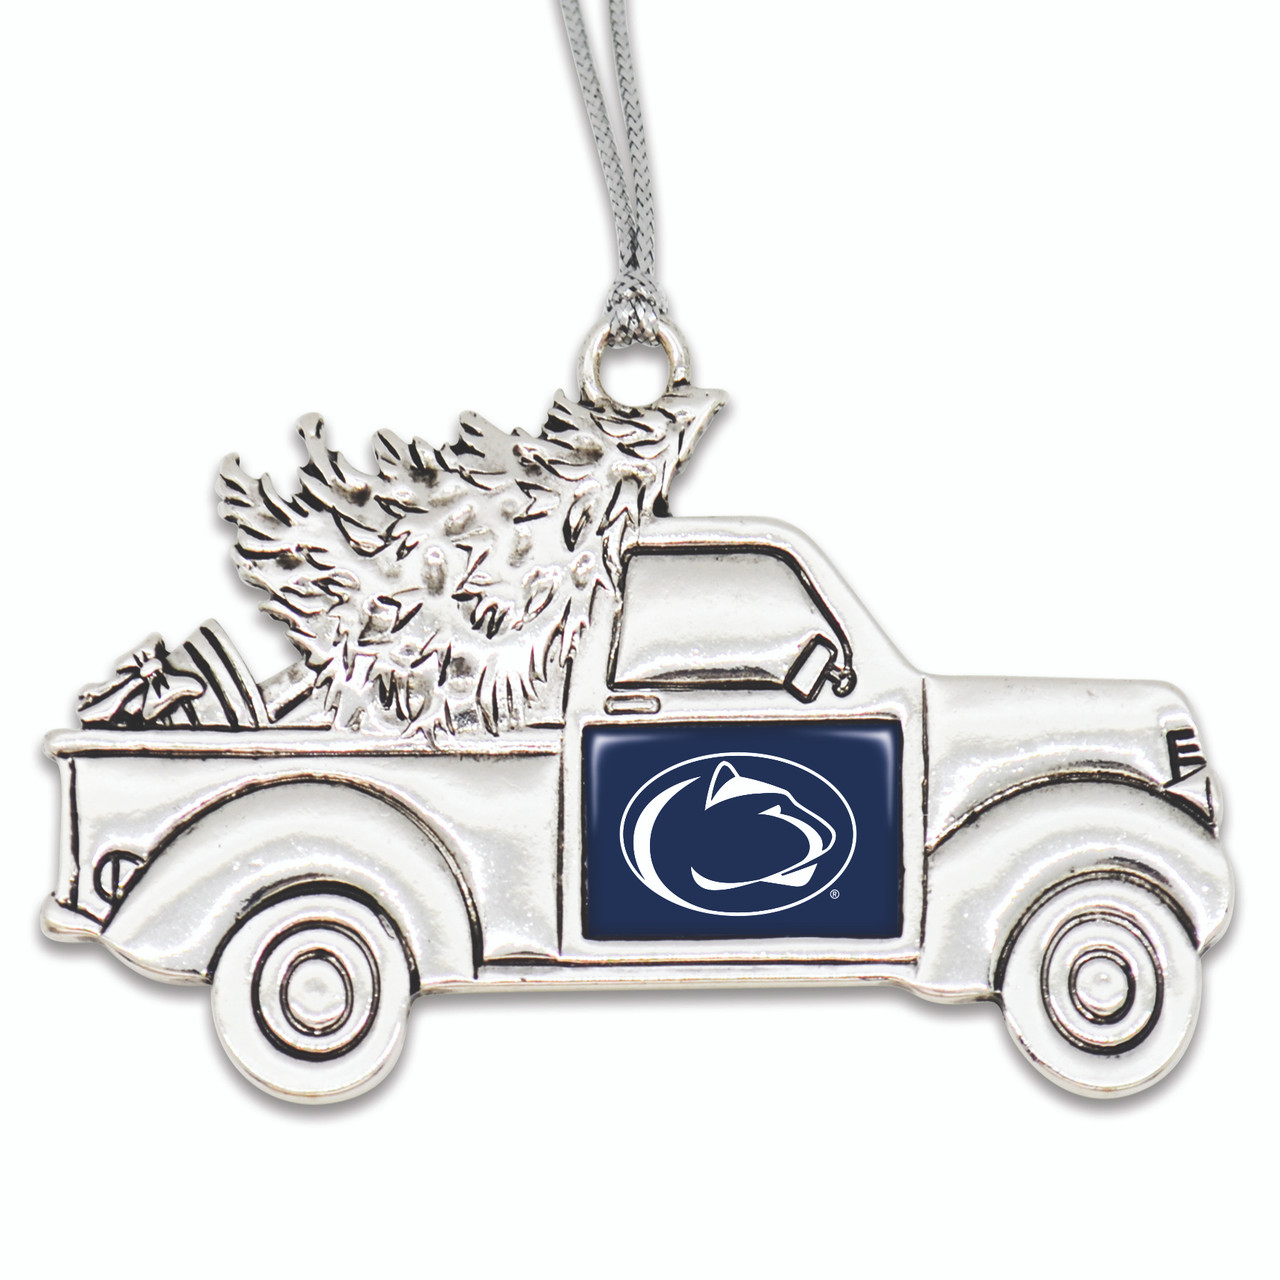 Penn State Nittany Lions Vintage Truck Ornament